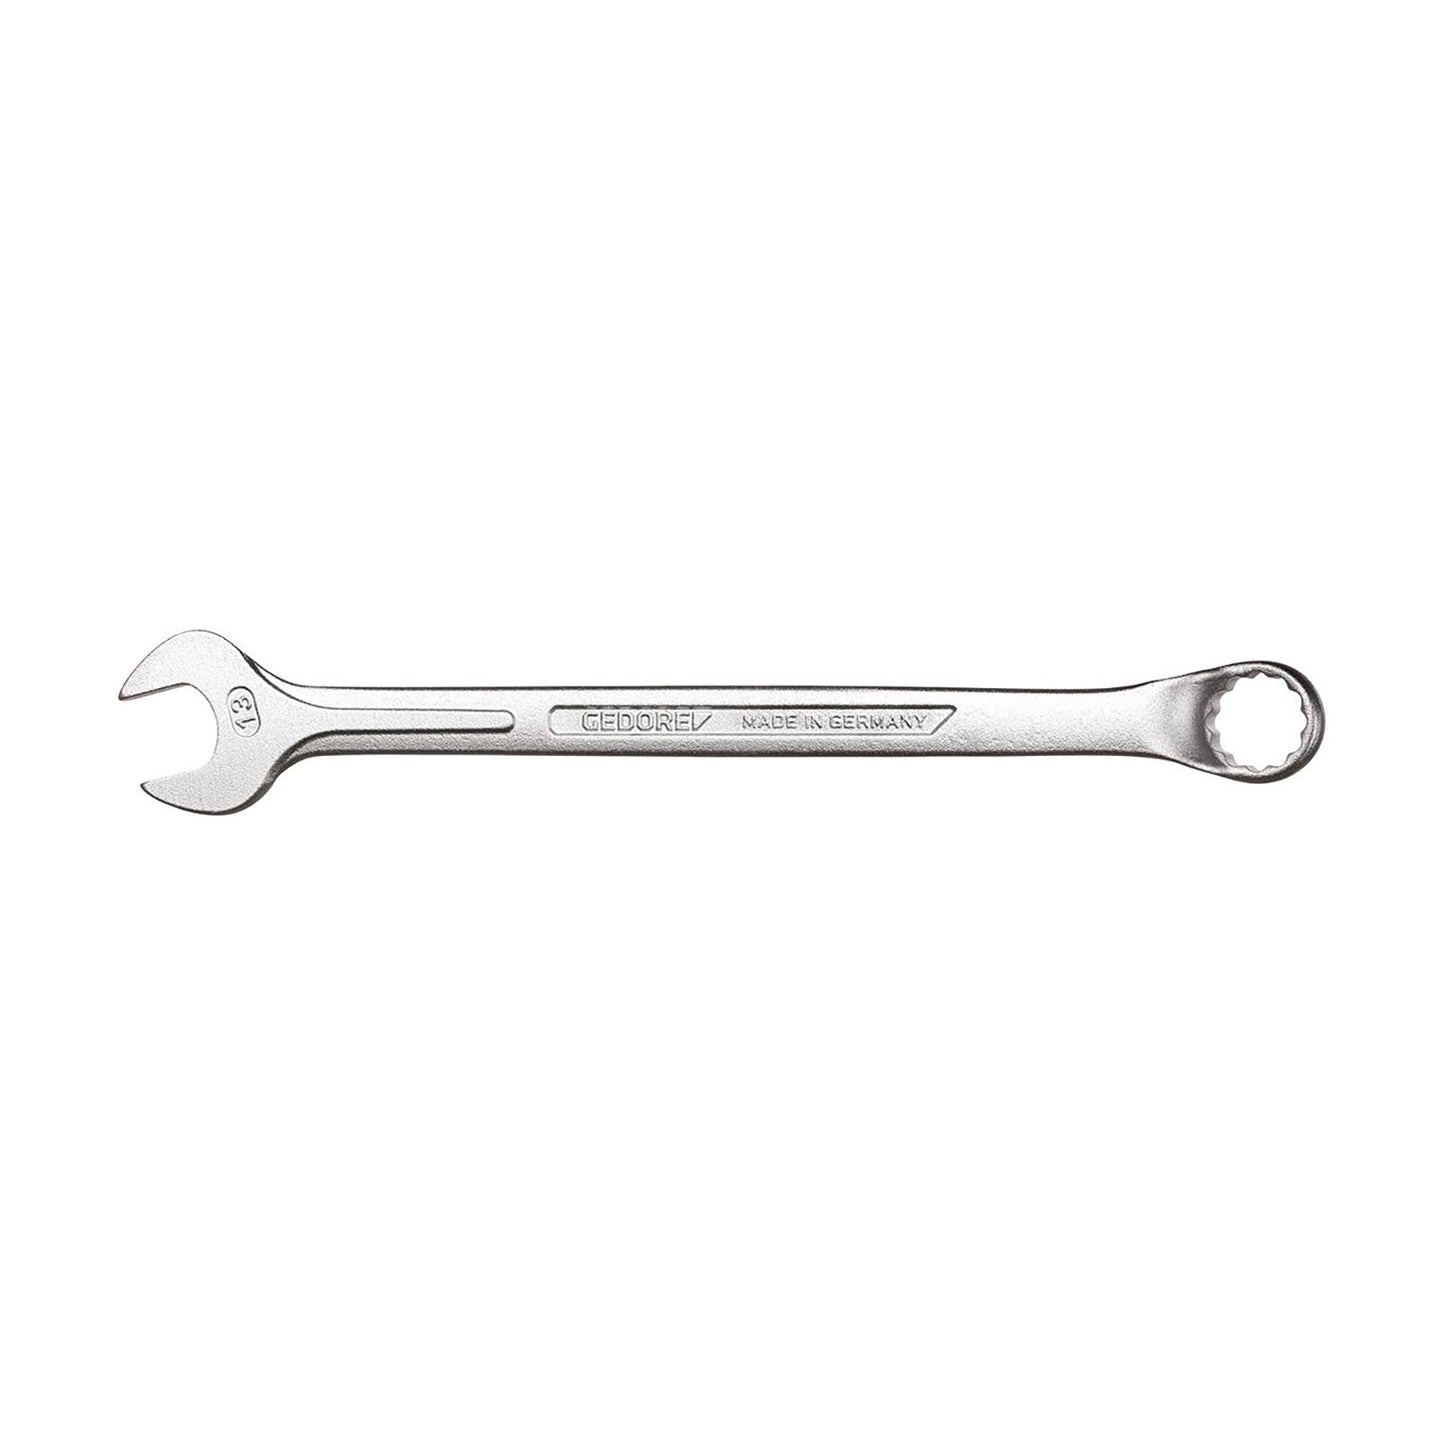 GEDORE 1 B 5/8W - Offset Combination Wrench, 5/8W (6010390)